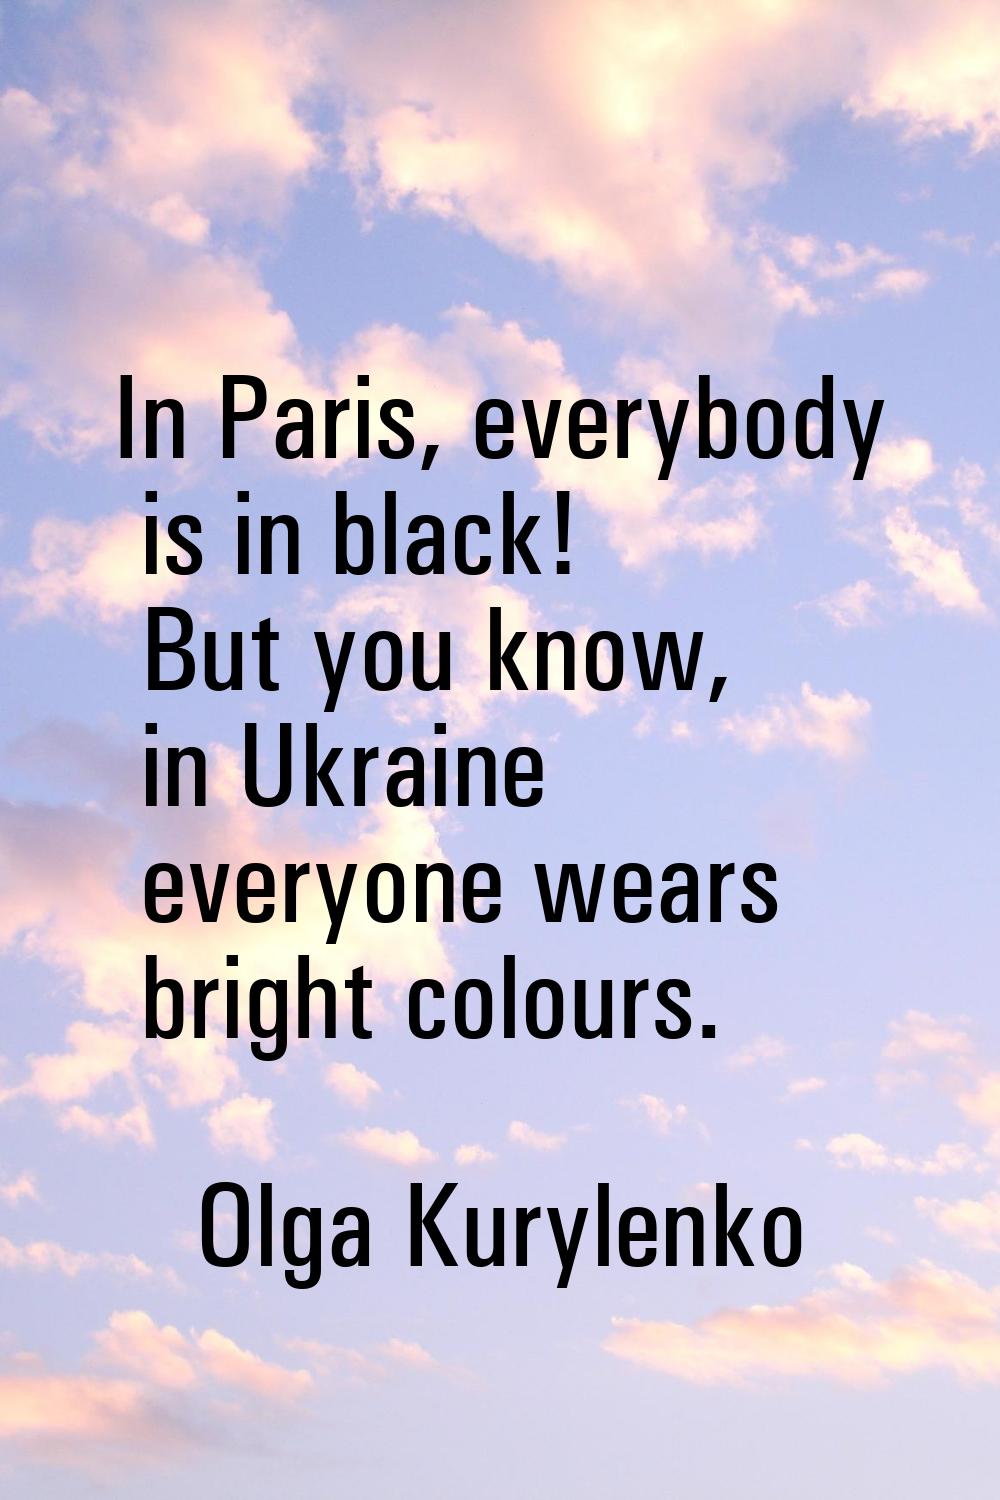 In Paris, everybody is in black! But you know, in Ukraine everyone wears bright colours.